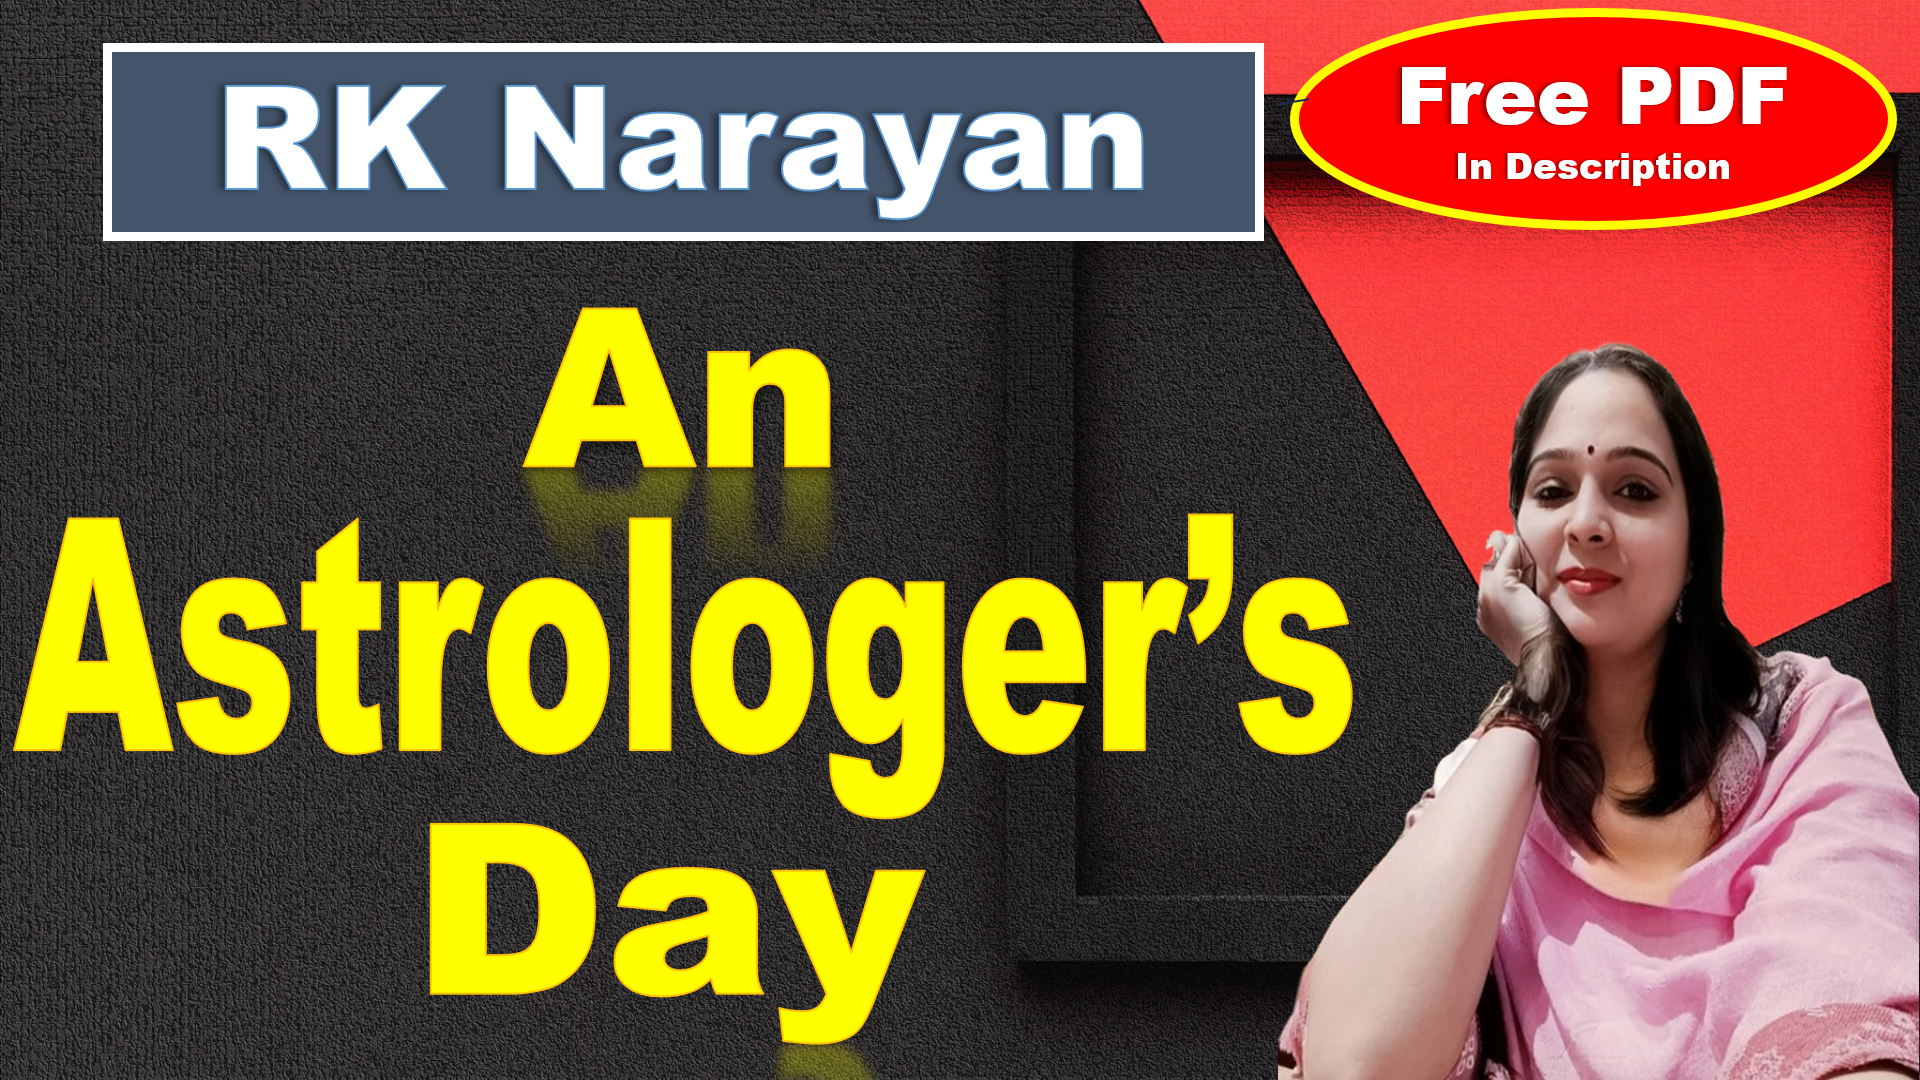 You are currently viewing An Astrologer’s Day by RK Narayan | An Astrologer’s Day | Download Free PDF – Easy Literary Lessons